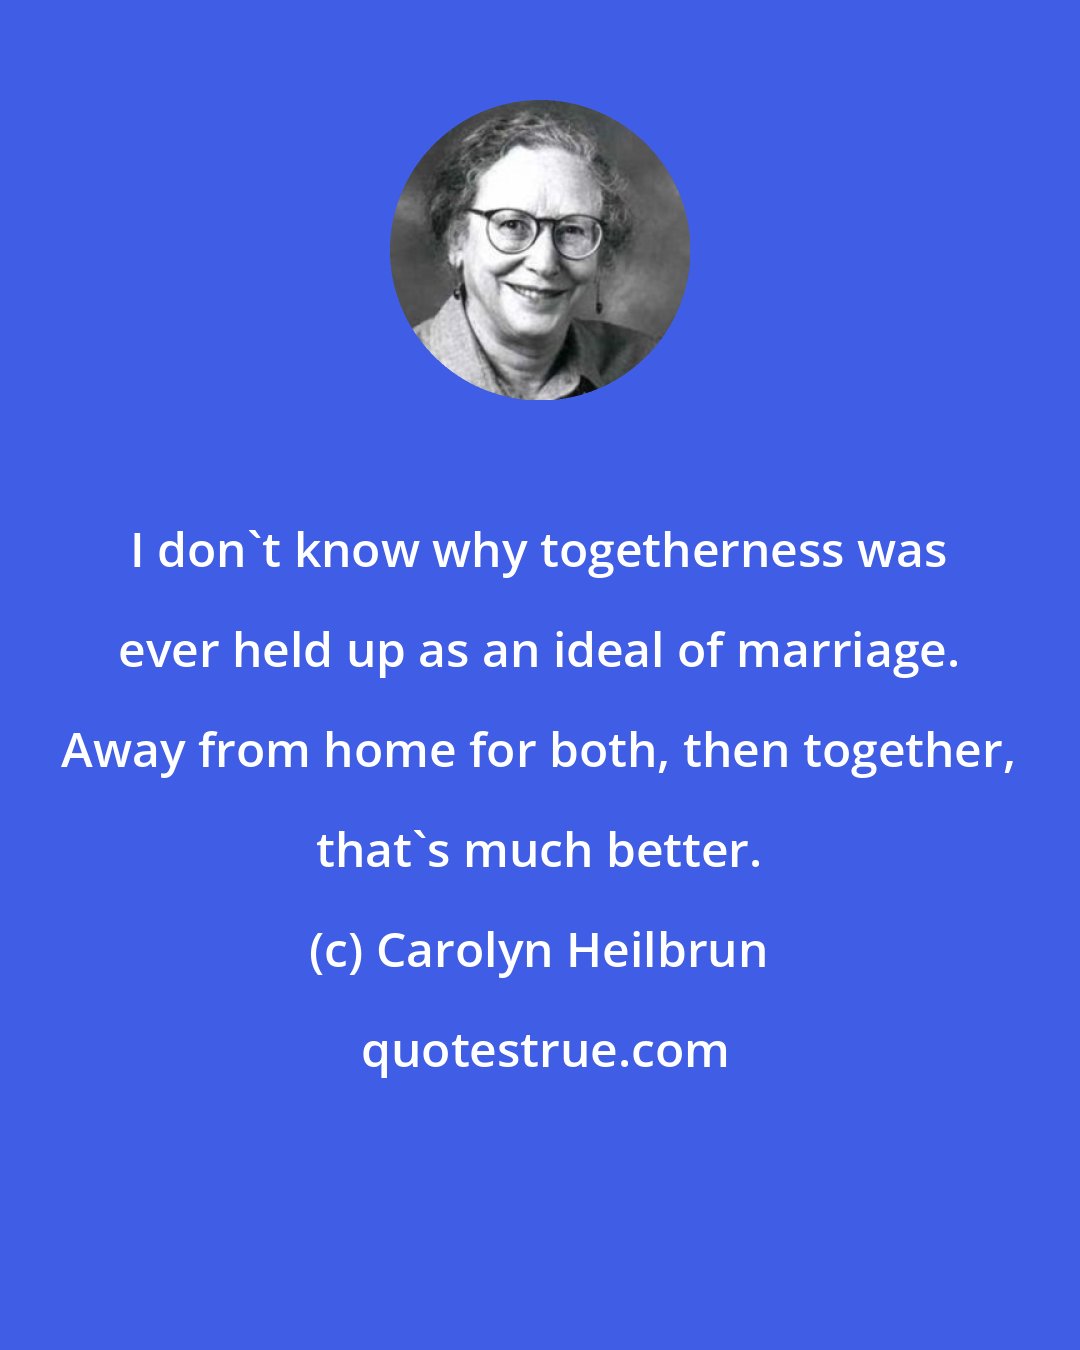 Carolyn Heilbrun: I don't know why togetherness was ever held up as an ideal of marriage. Away from home for both, then together, that's much better.